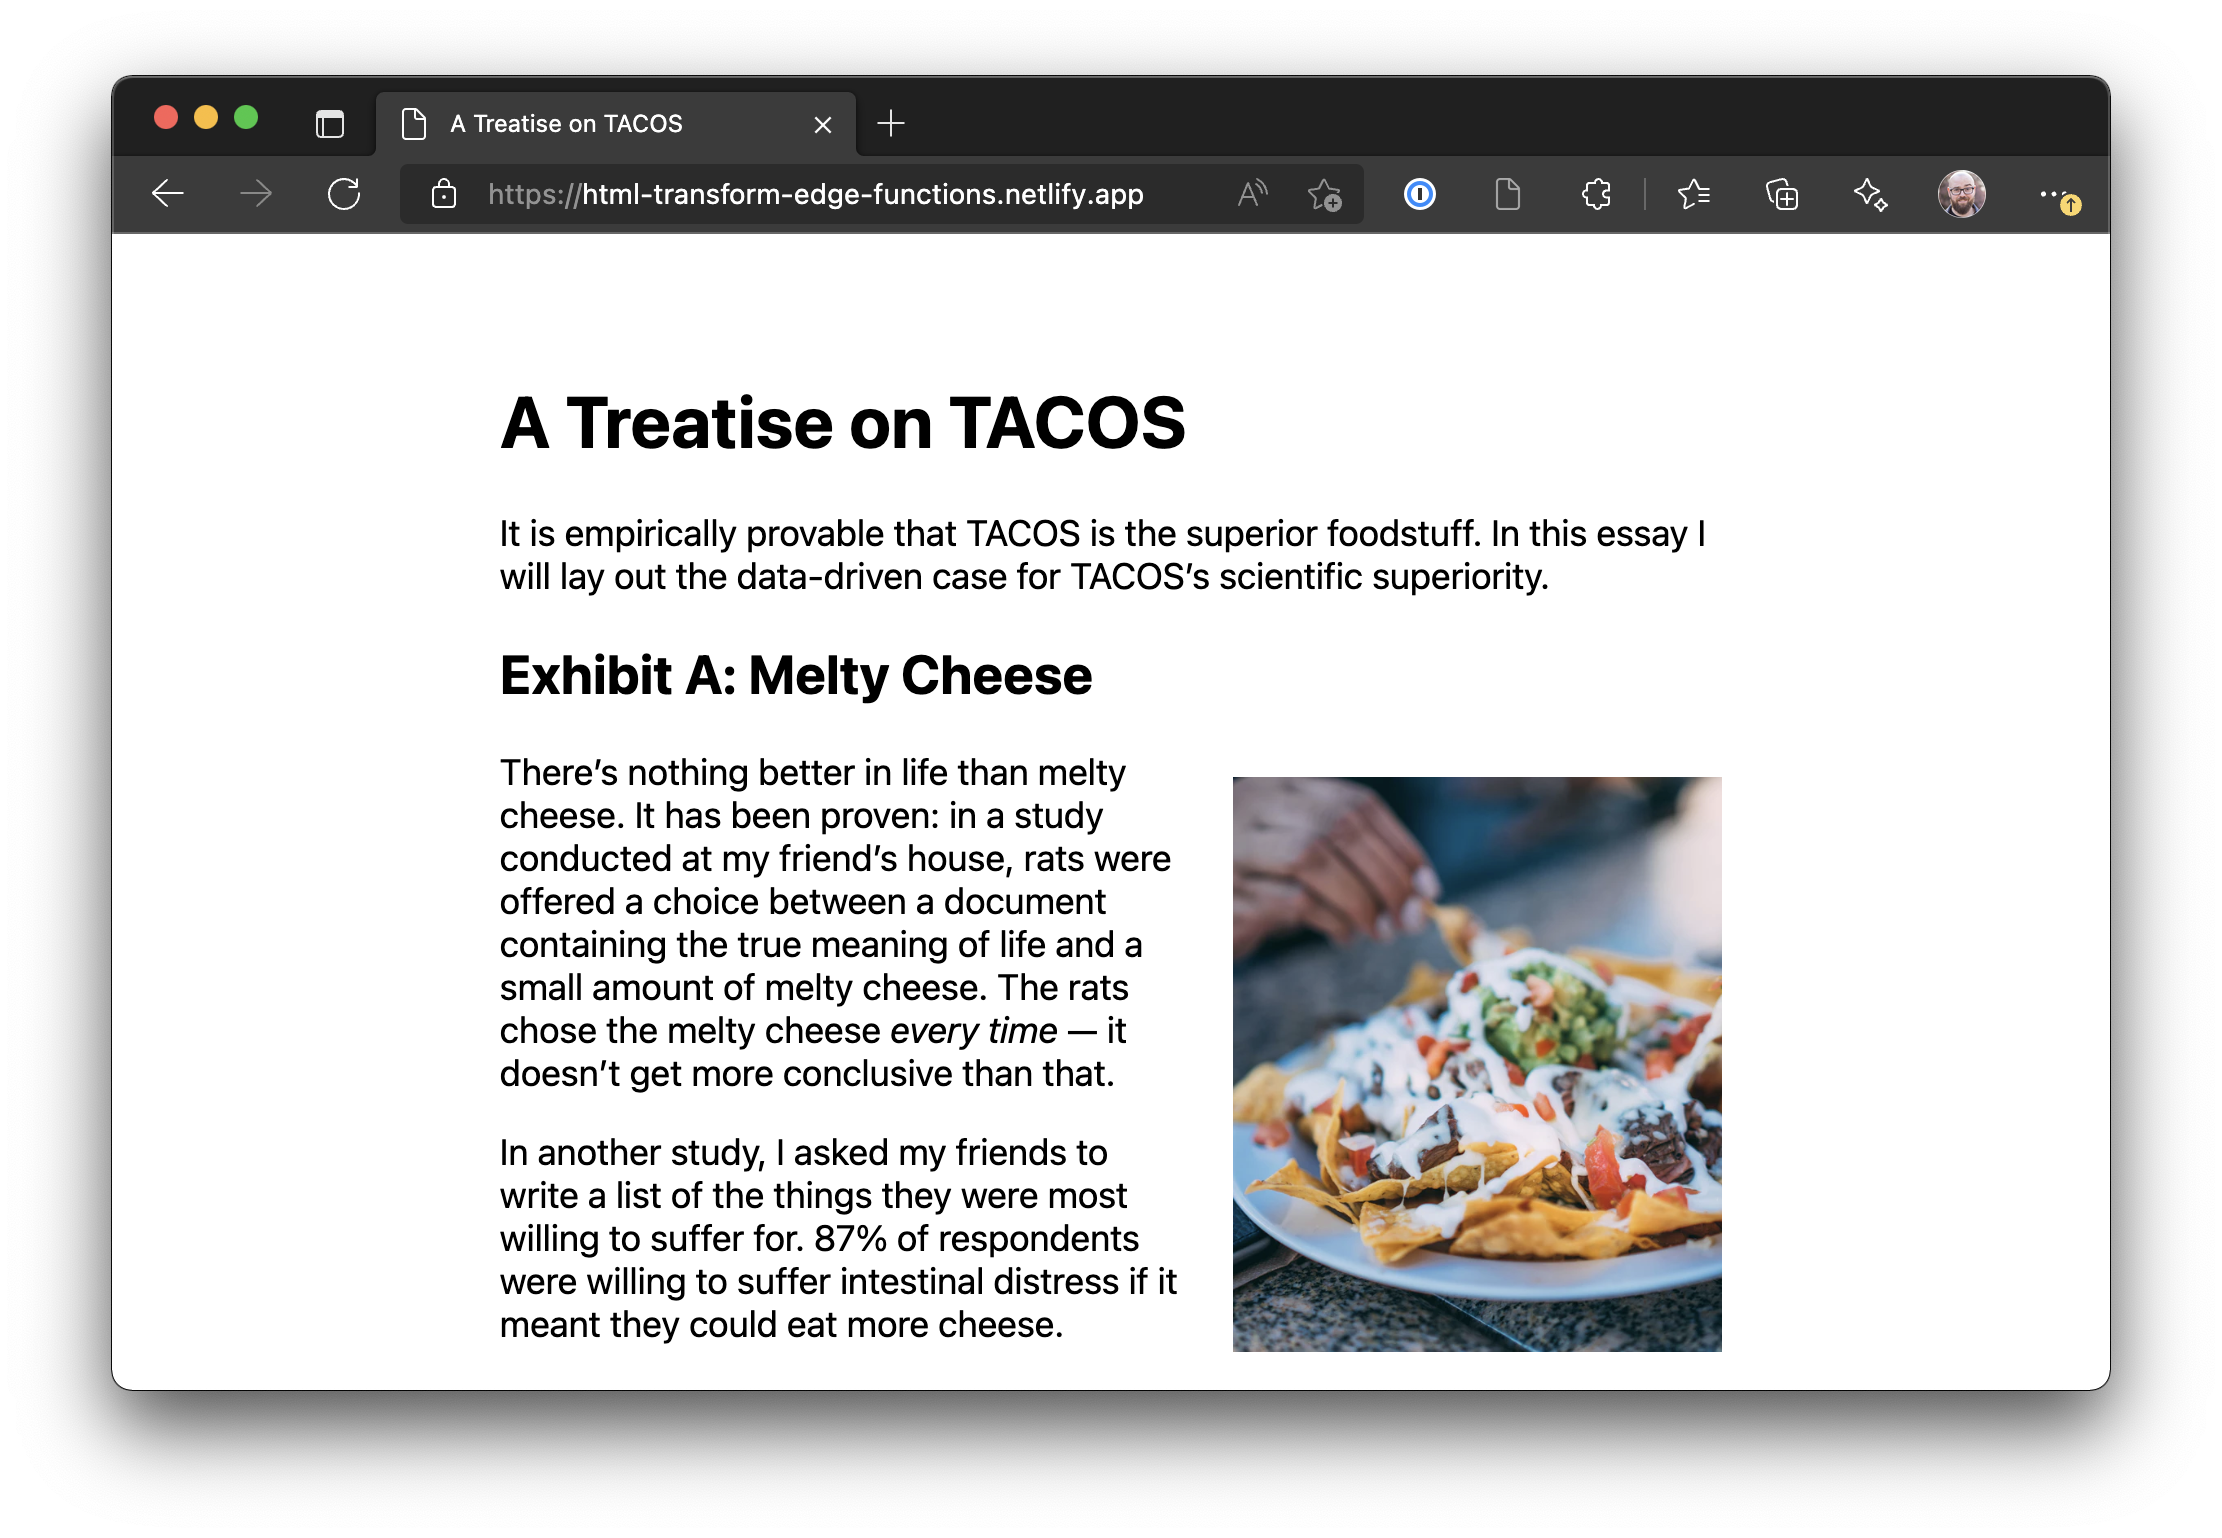 The transformed HTML deployed to Netlify